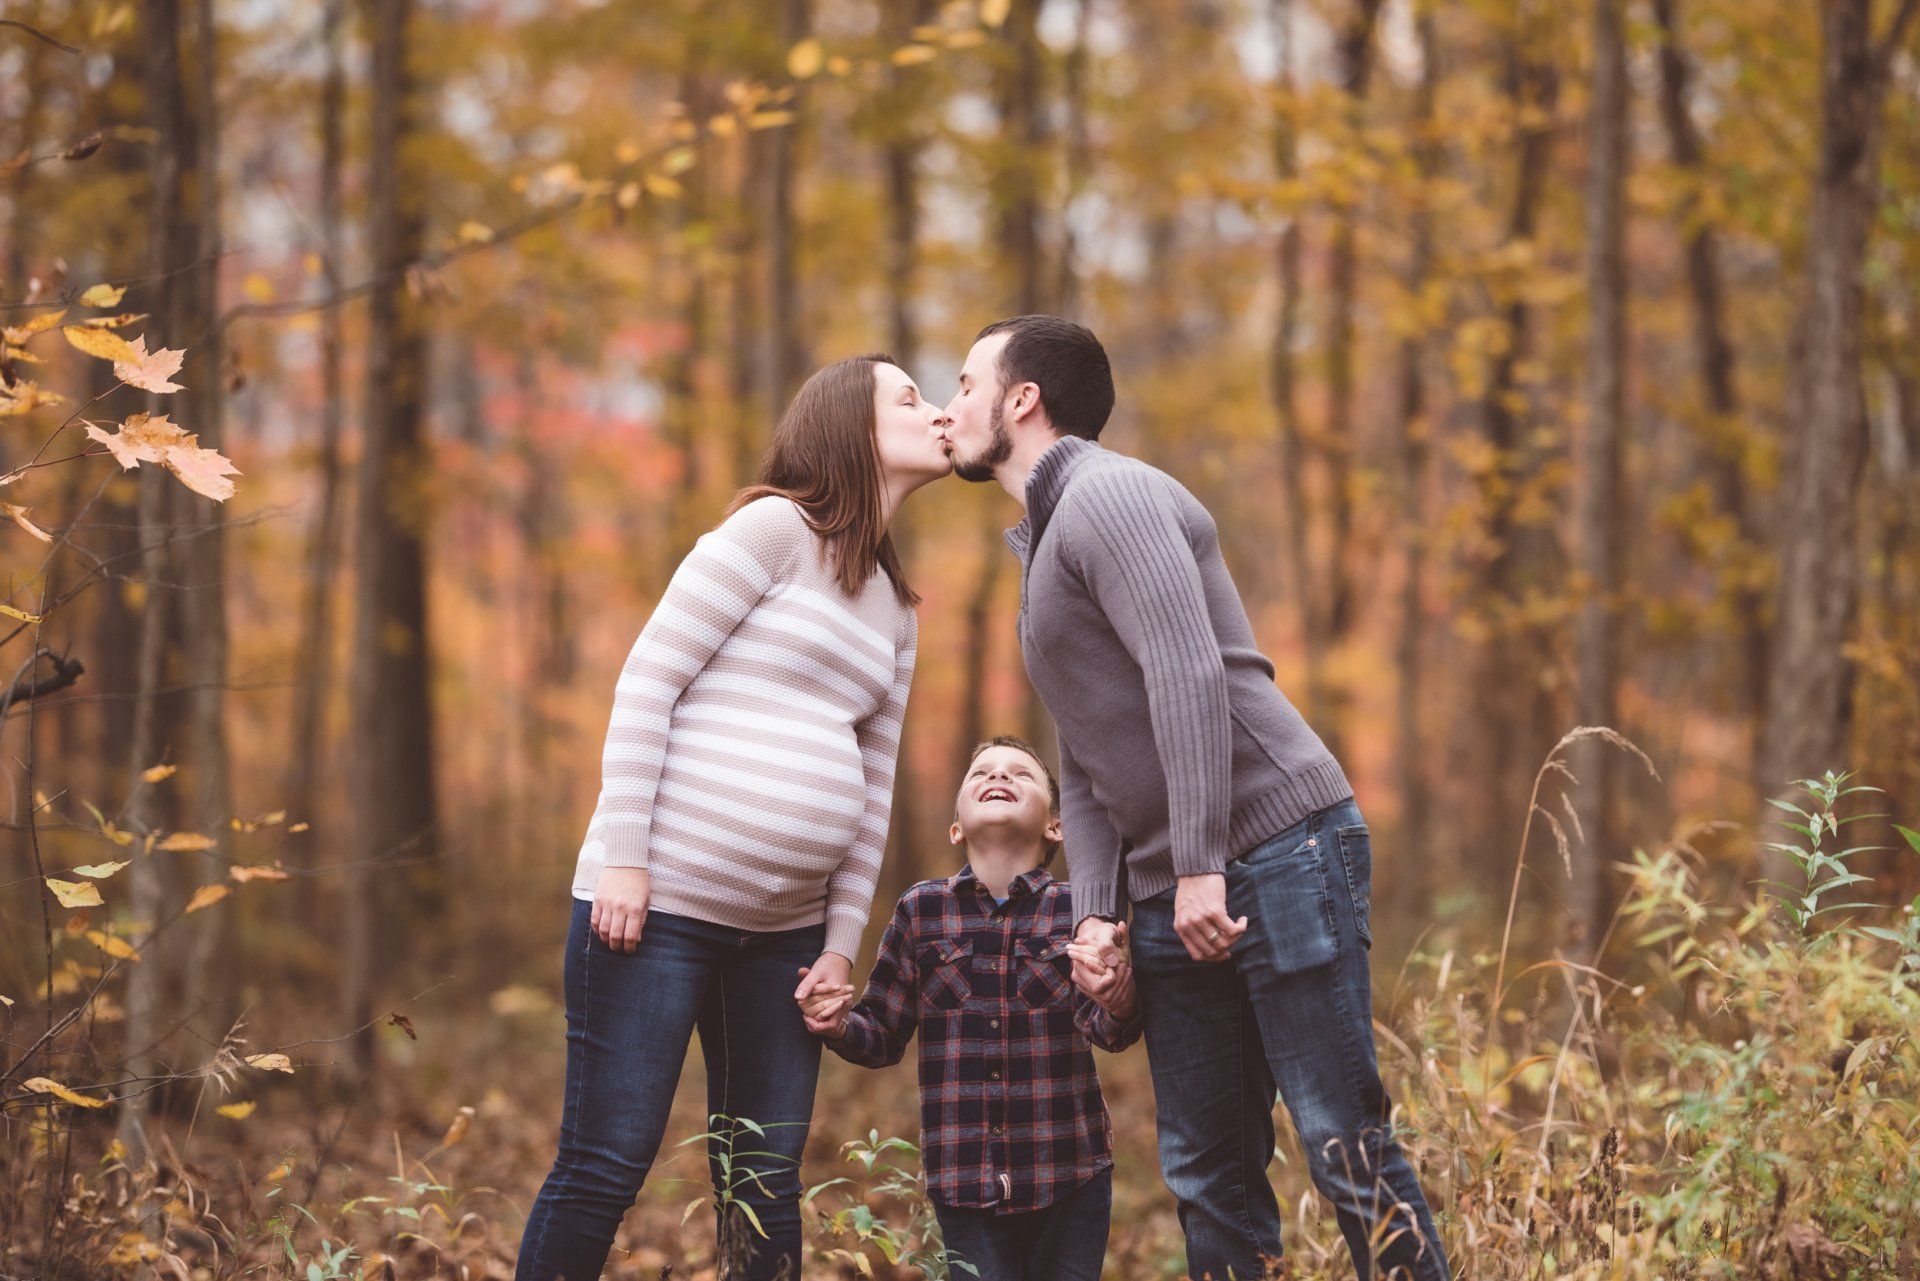 Family photography on location